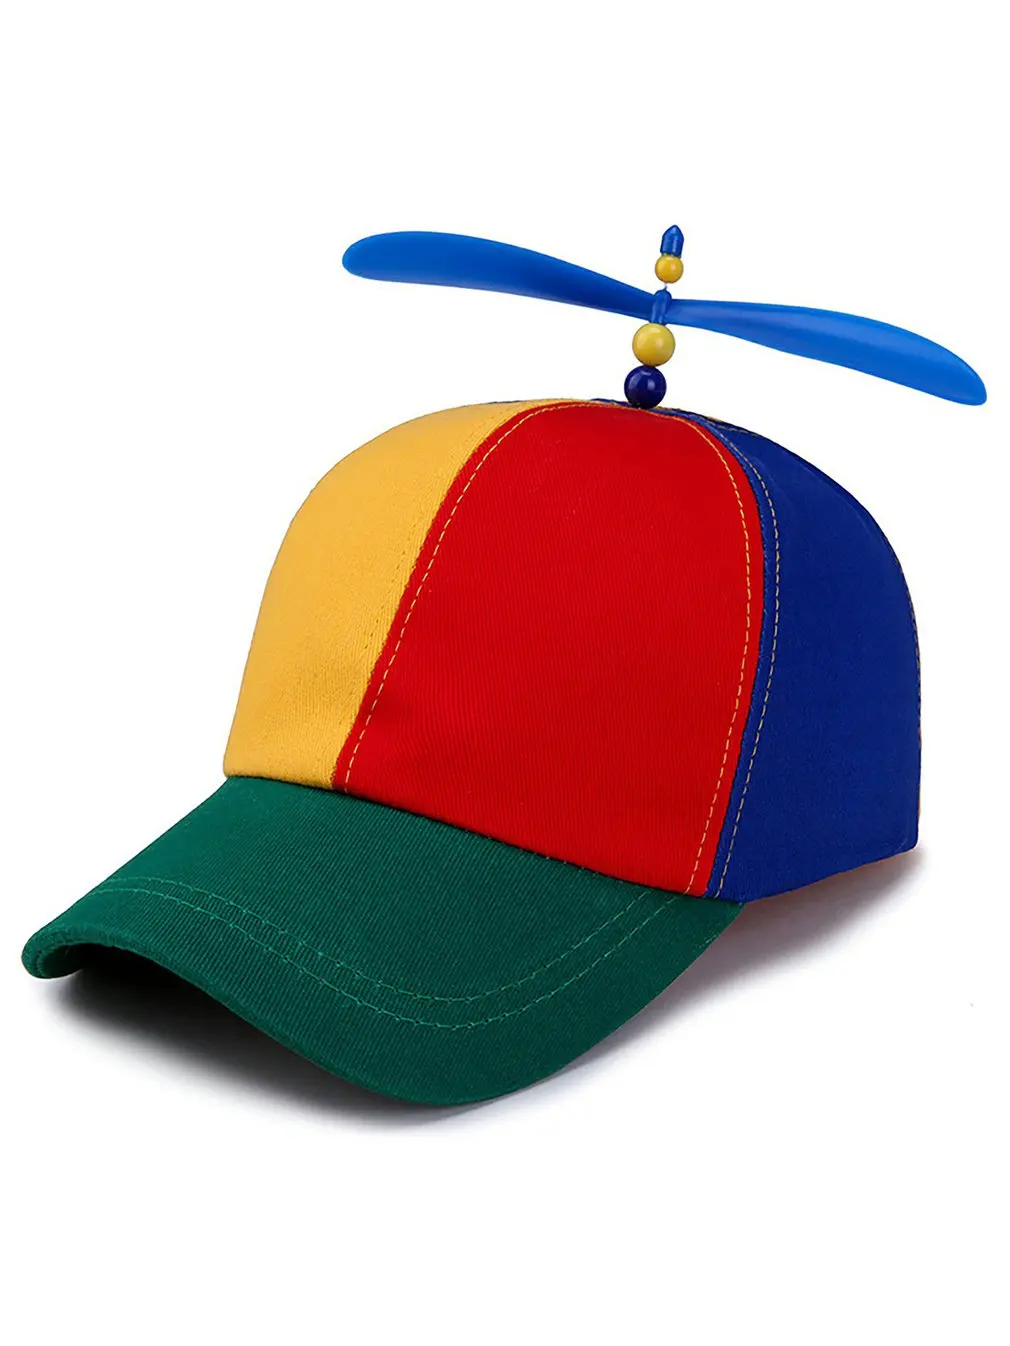 custom baby accessories Fashion Colorful Bamboo Dragonfly Patchwork baseball cap Adult Helicopter Propeller funny Adventure dad hat Snapback hat child safety seat Baby Accessories